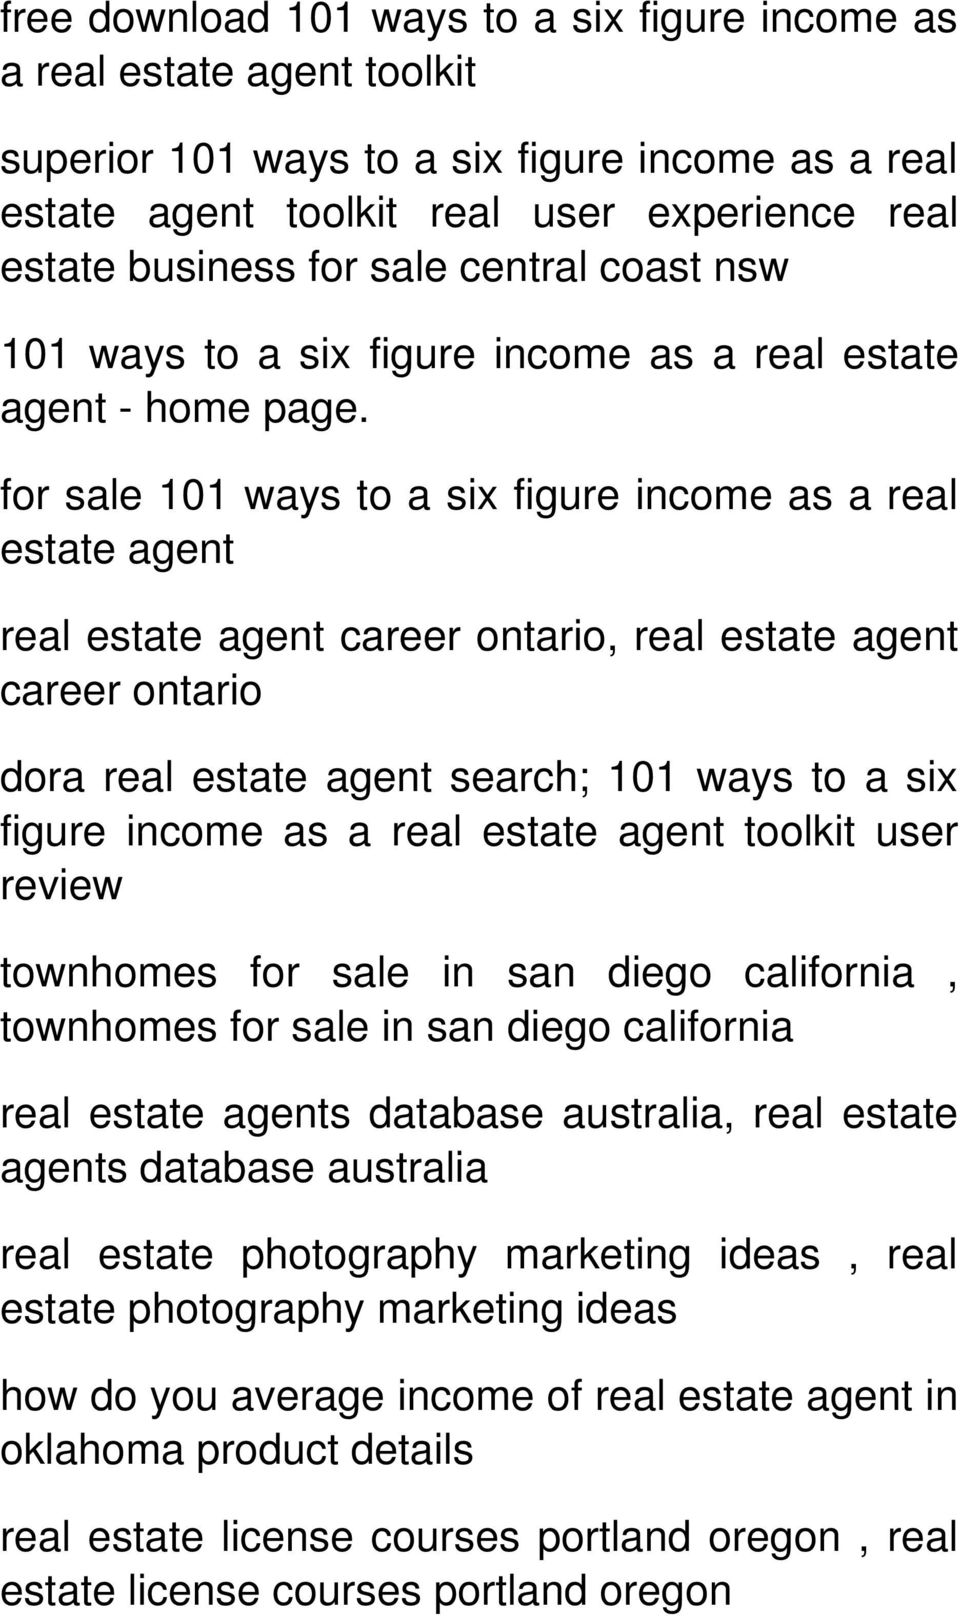 for sale 101 ways to a six figure income as a real estate agent real estate agent career ontario, real estate agent career ontario dora real estate agent search; 101 ways to a six figure income as a